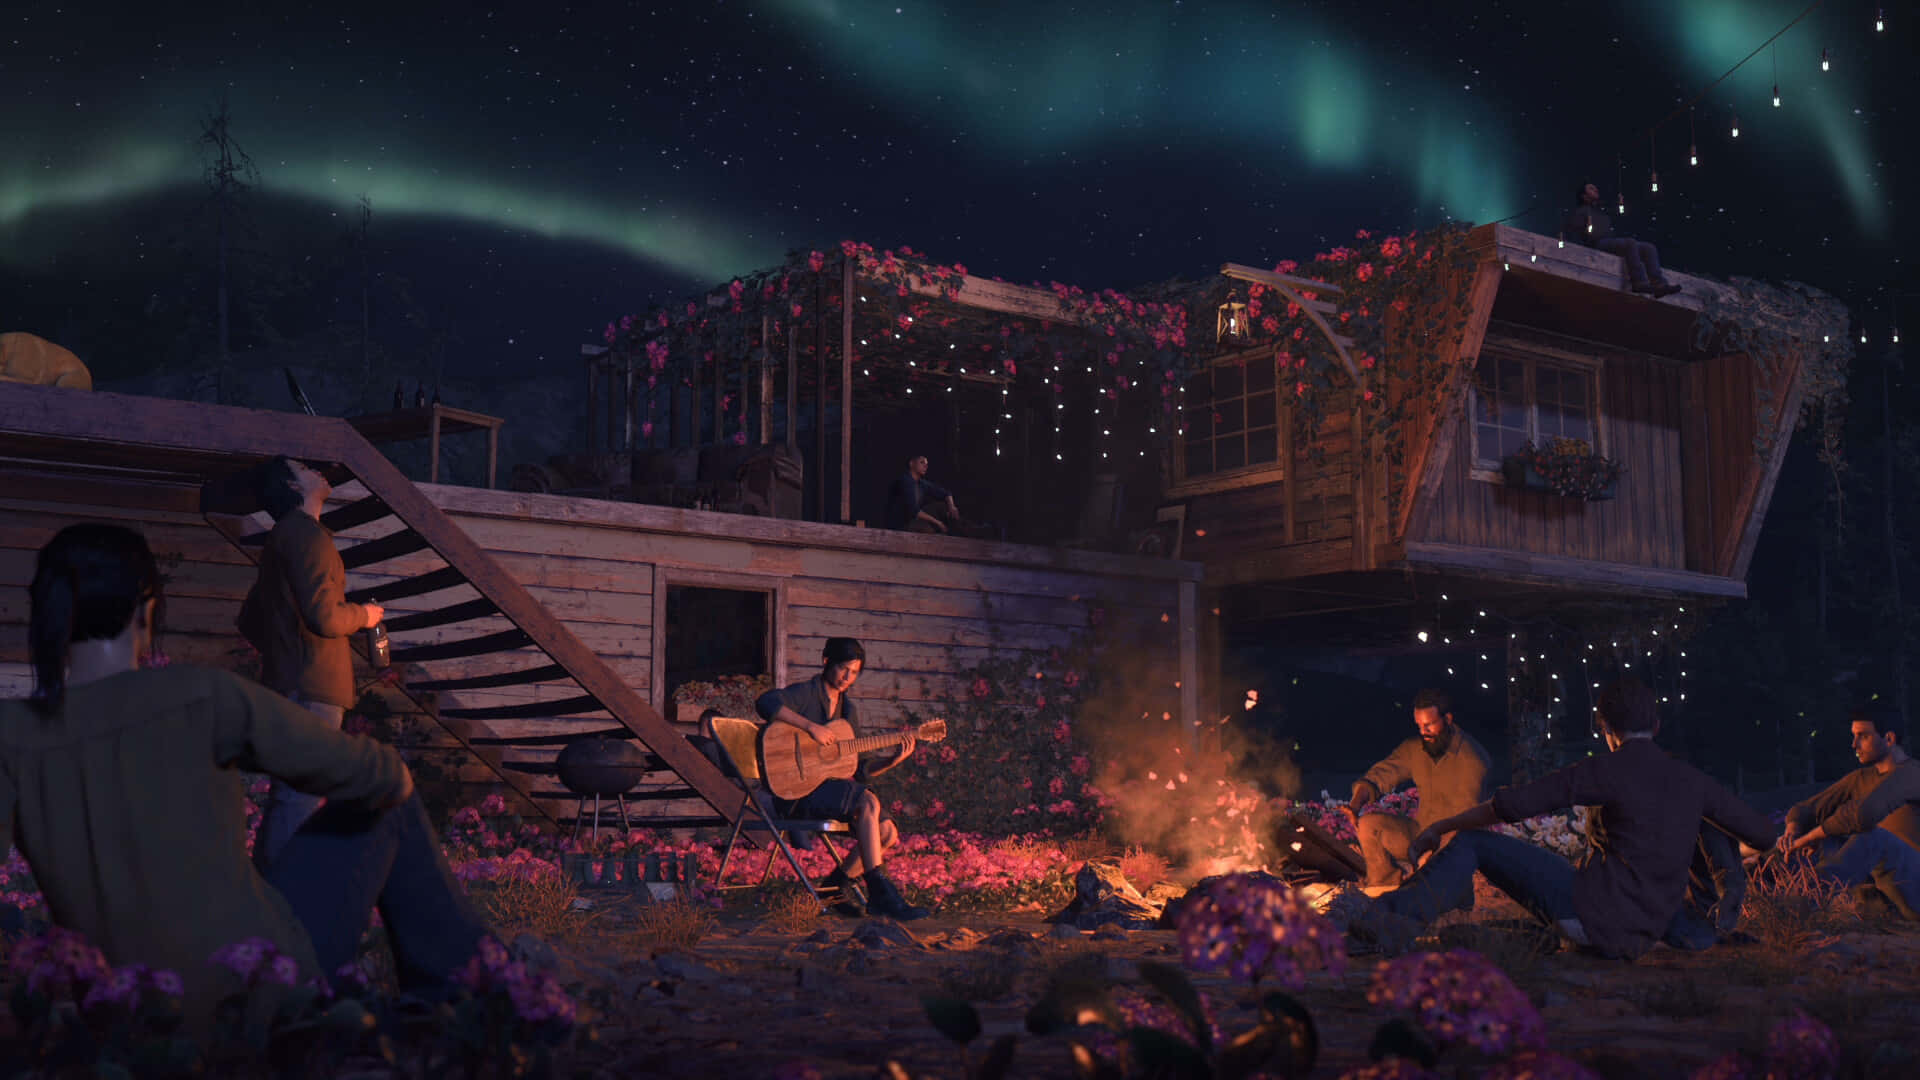 A Group Of People Are Sitting In Front Of A Cabin With Aurora Lights